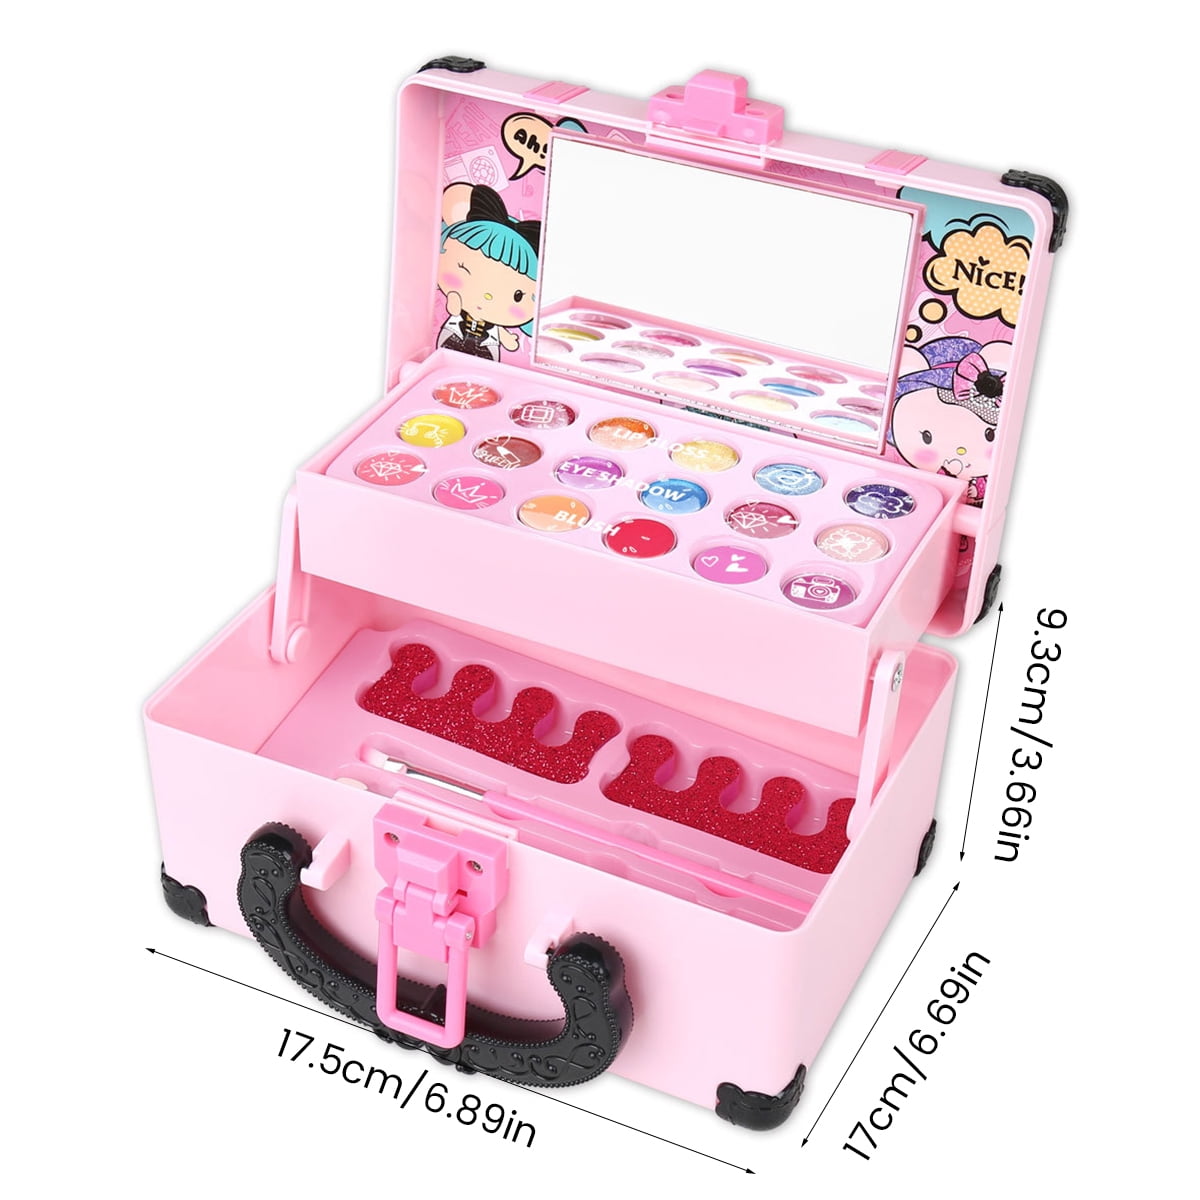 Lieonvis Kids Makeup Kit for Girls,Real Washable Makeup Toy for Little Girl  Princess Play Make Up Birthday Gift Toy Child Play Makeup Toys for